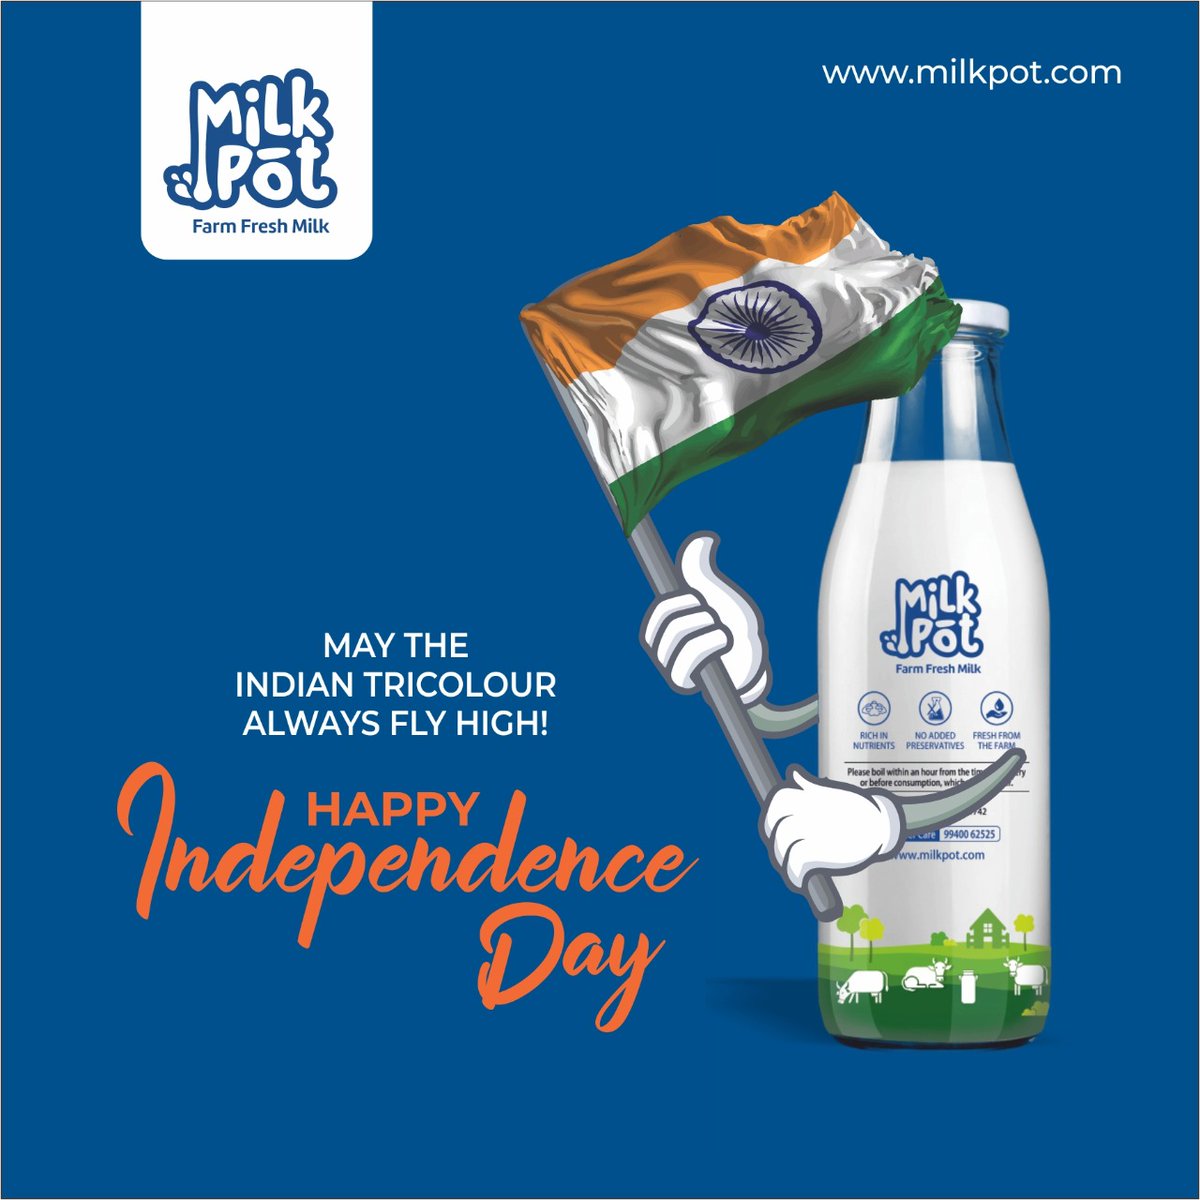 The tribute will always be less for our freedom fighters but the salute to all will never be less. Milkpot salutes the entire nation, Happy Independence day! 

 #milkpot #farmfreshmilk #freshmilk #imagination #butterfly #puremilk #cowmilk #buffalomilk #chennai #Independenceday